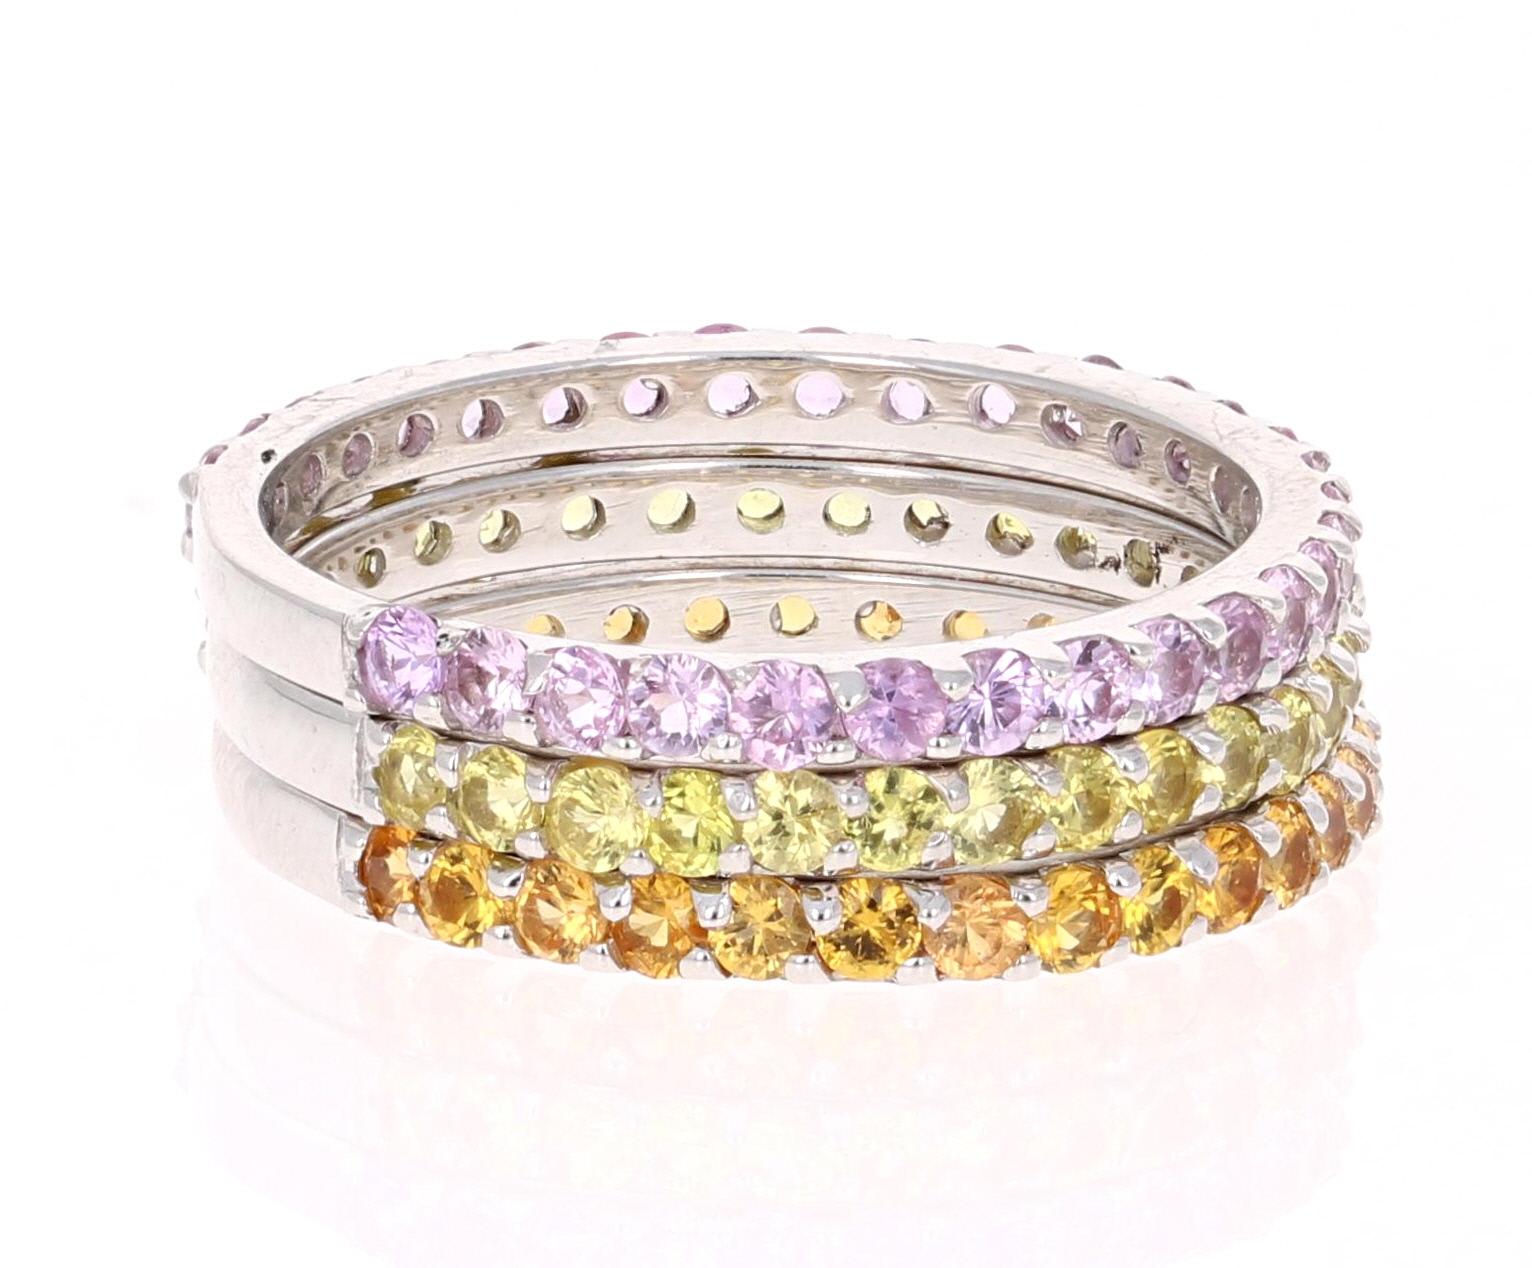 2.82 Carat Round Cut Pink Sapphire, Yellow Sapphire and Orange Sapphire White Gold Stackable Bands!

Set of 3 elegant and classy 2.82 Carat Sapphire bands that are sure to be a great addition to your accessory collection!   There are 30 Round Cut